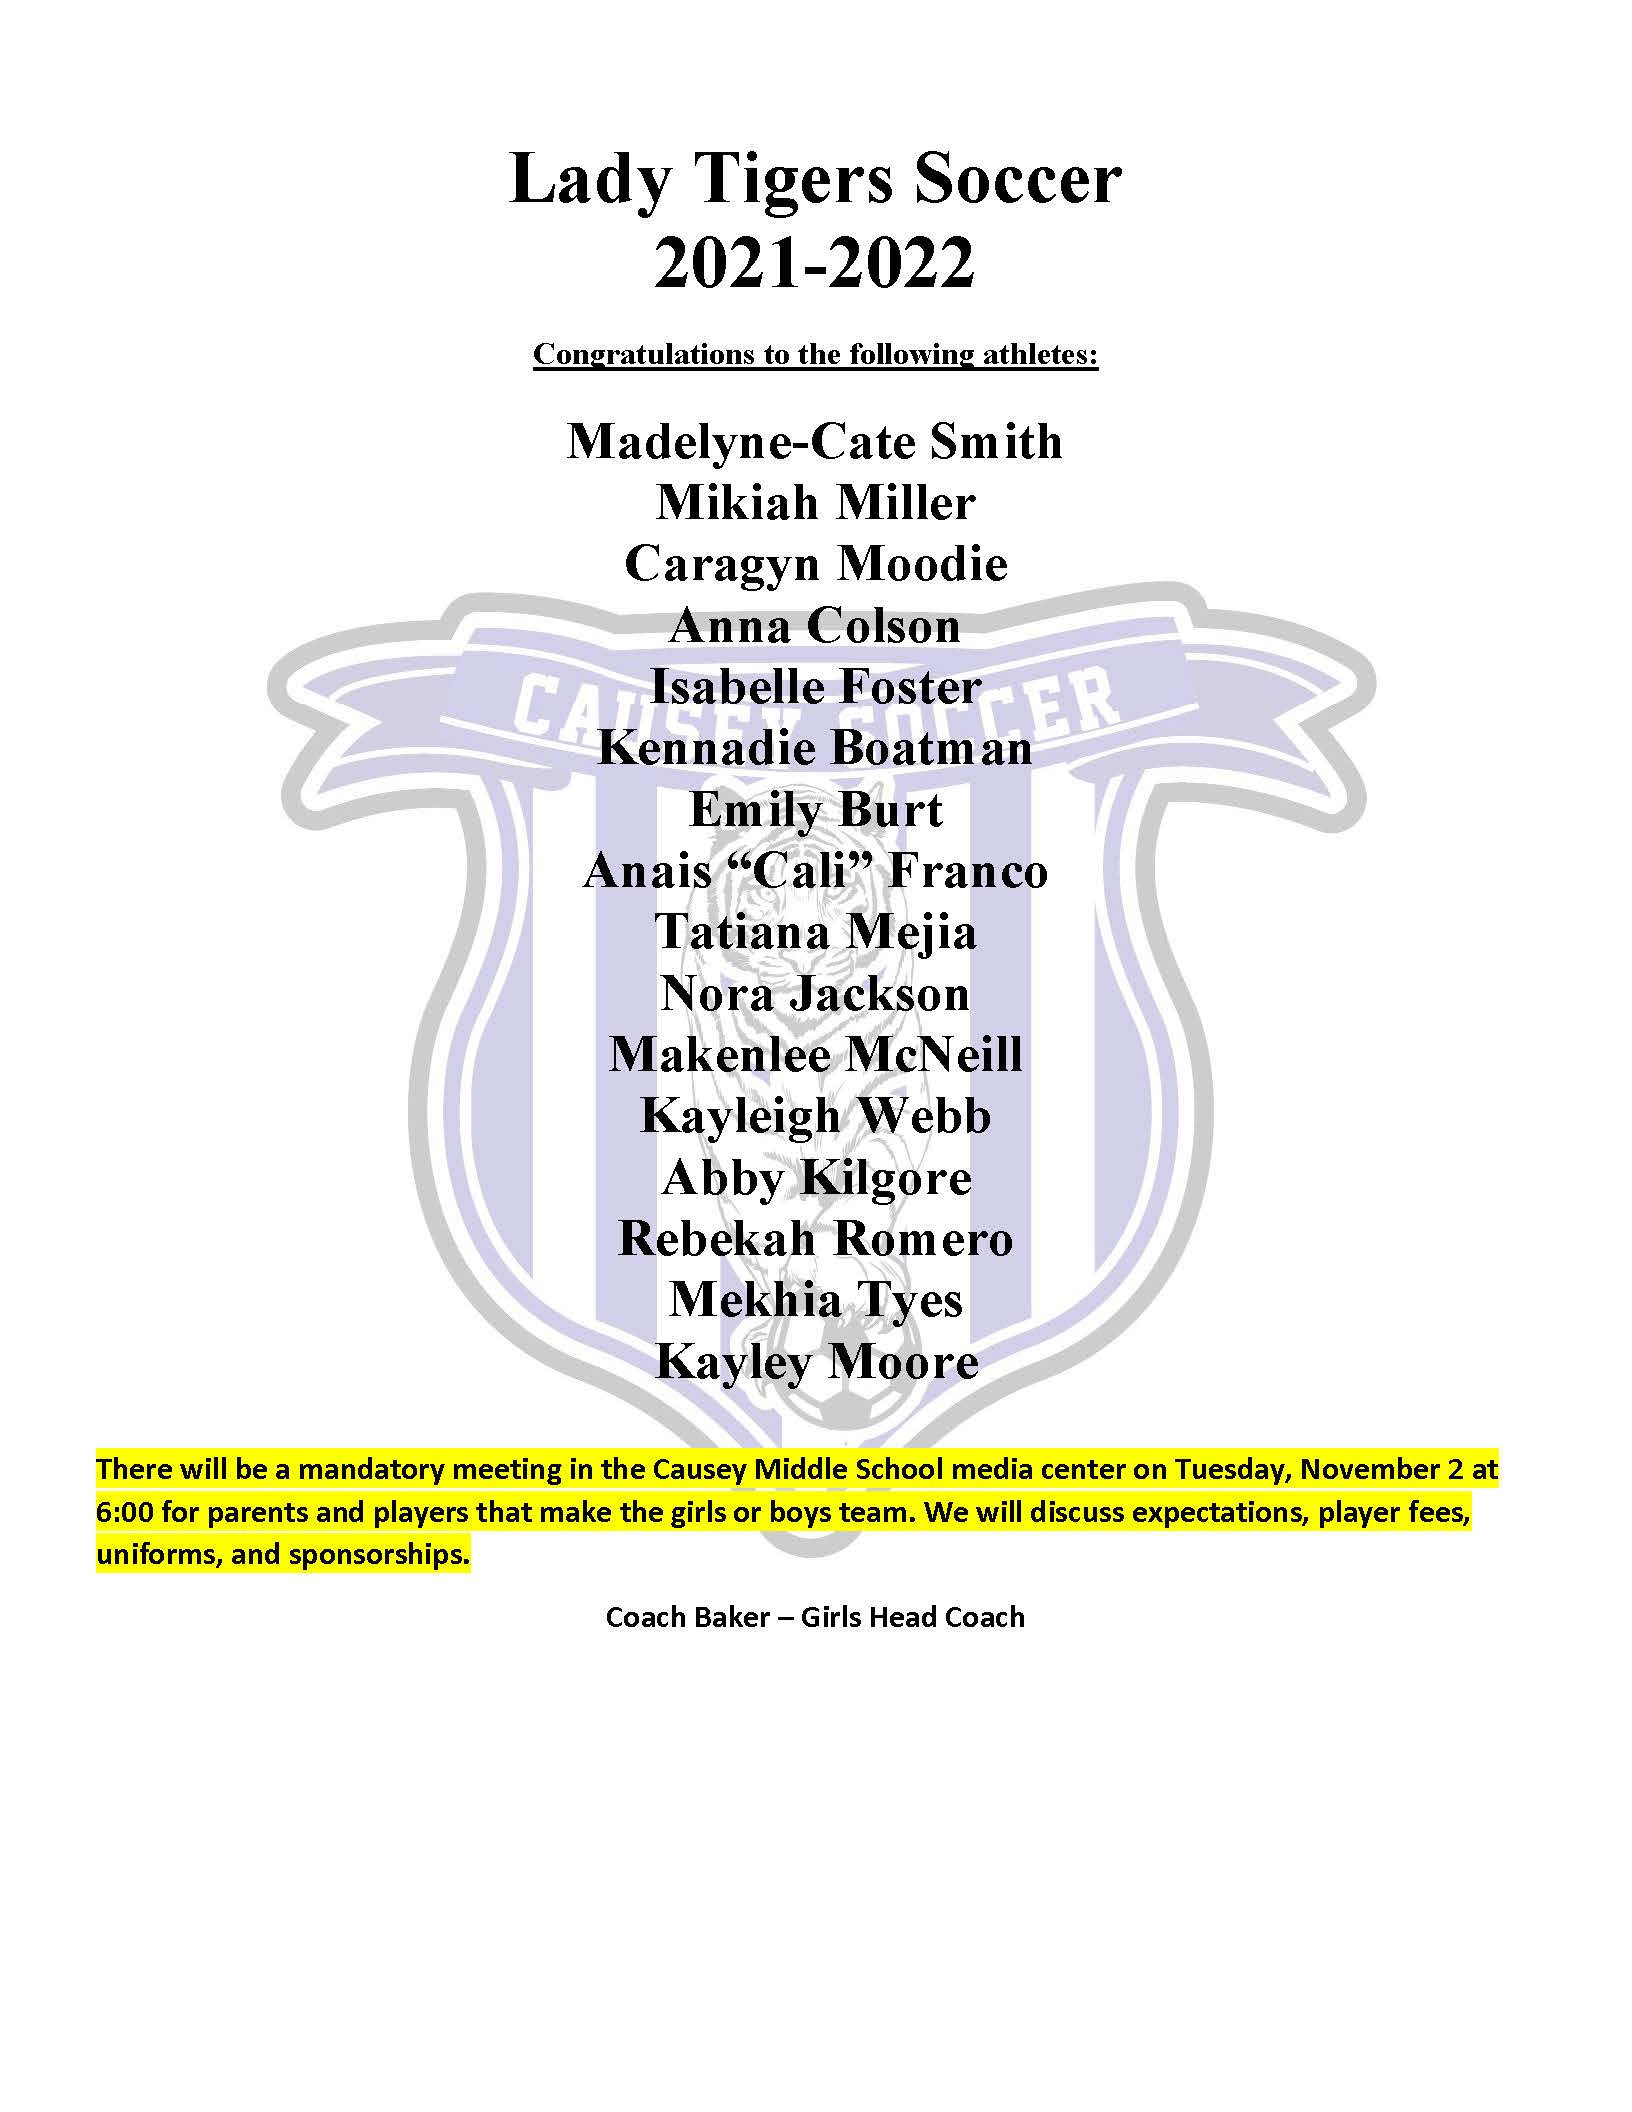 Causey Soccer Roster